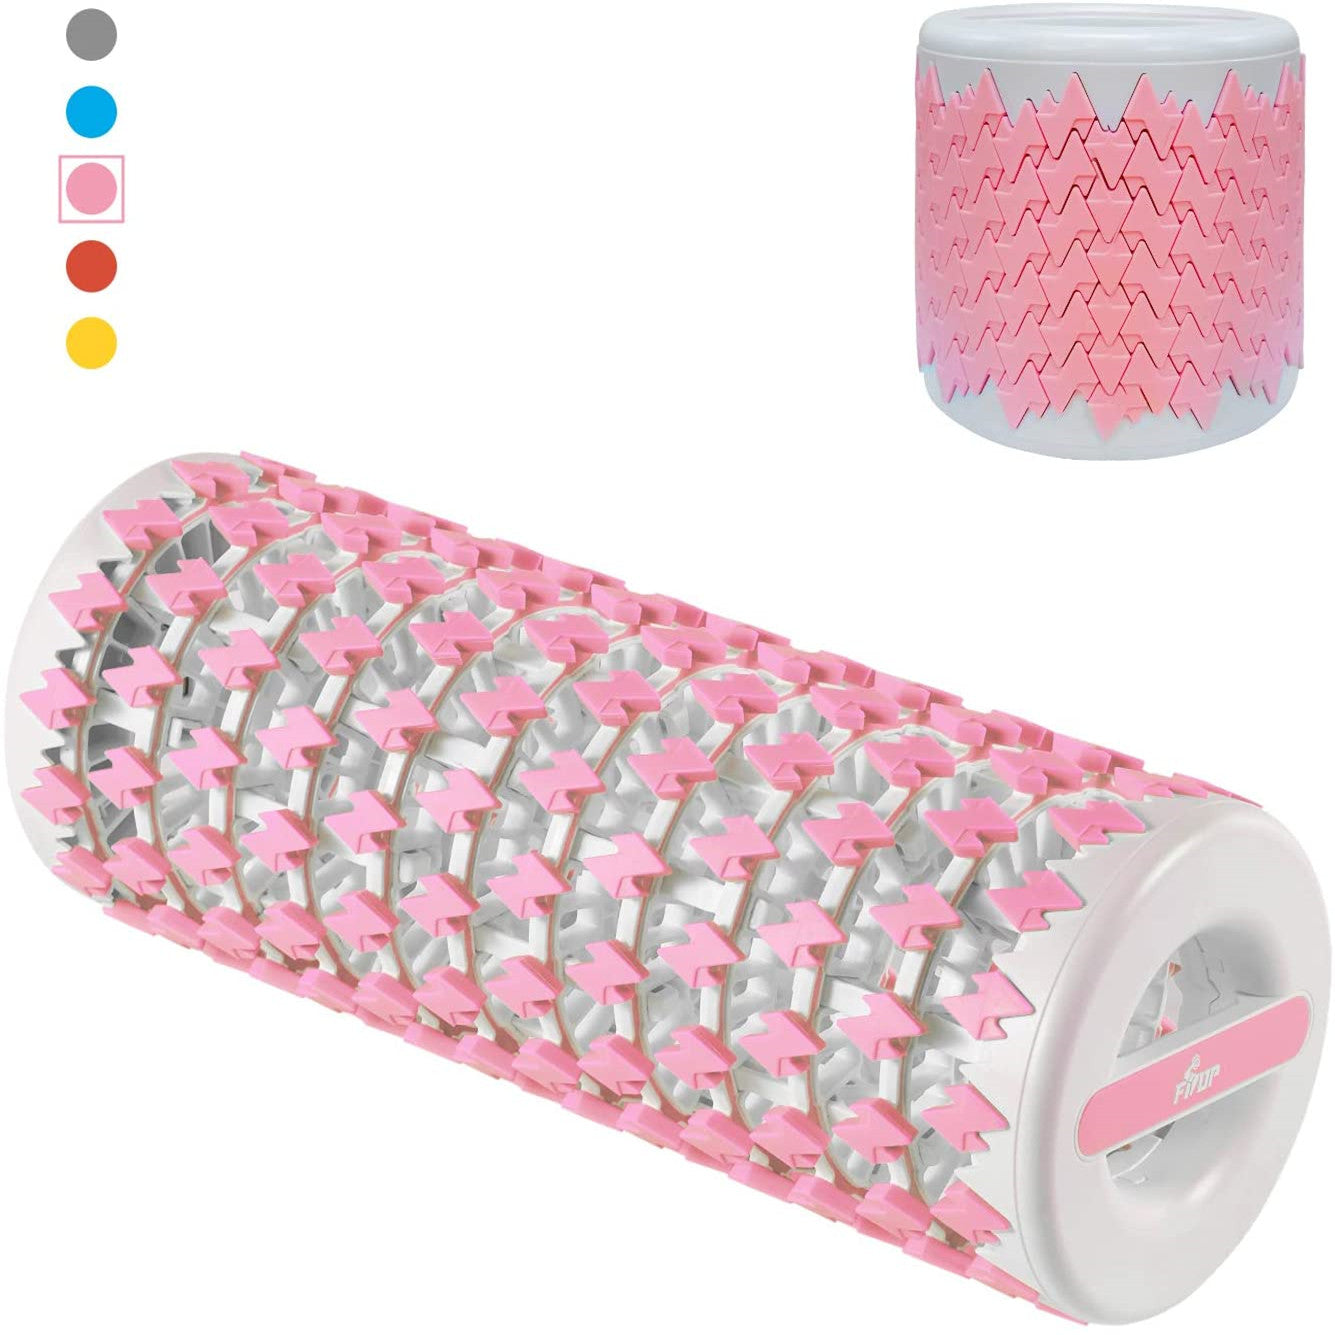 FISUP Foam Roller For Physical Therapy And Exercise Back Stretching Adjustable Deep Tissue Massager For Home Gym Pink